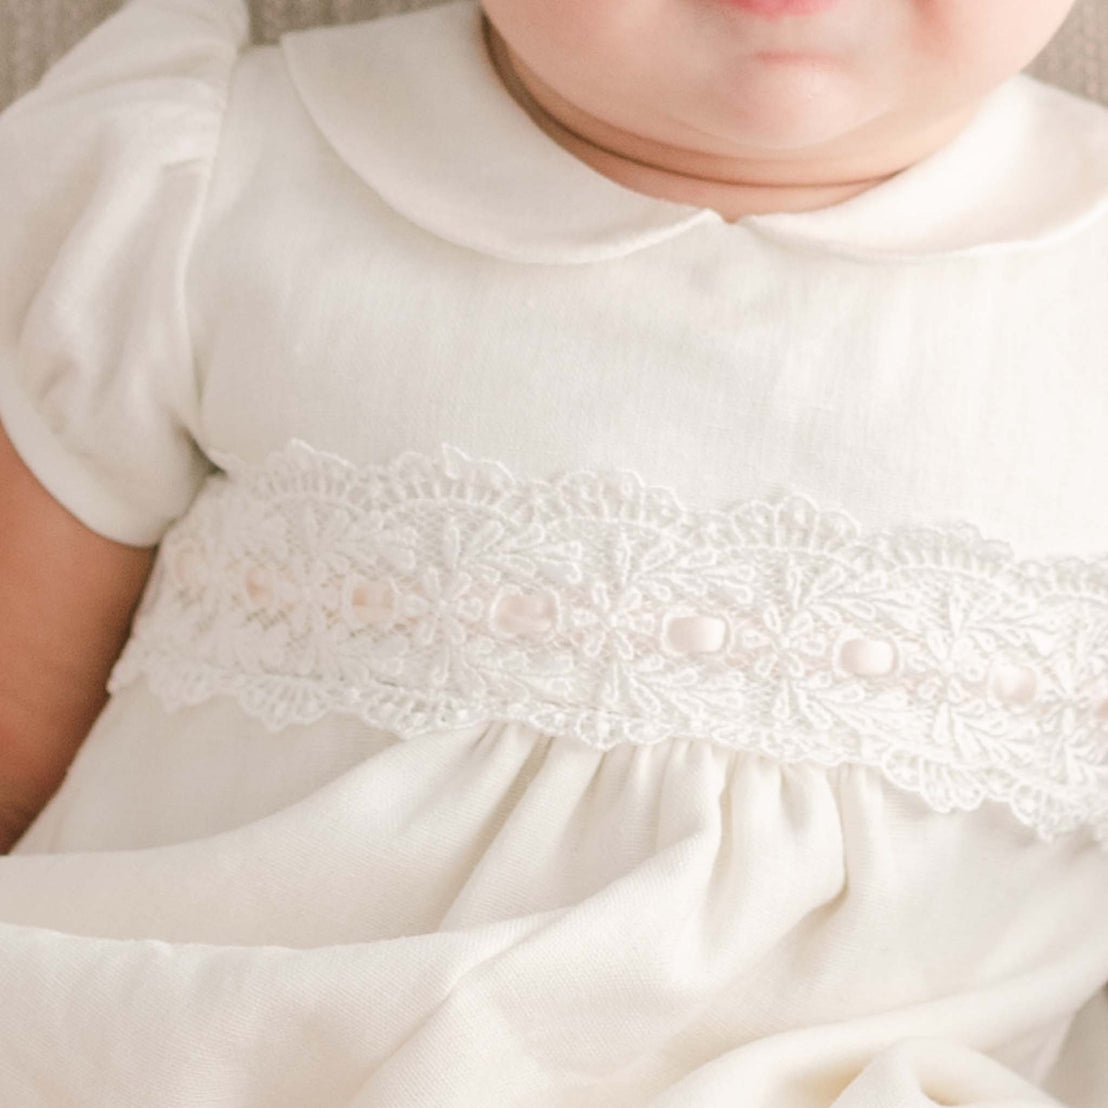 Close-up of a baby wearing an Emma Convertible Skirt & Romper Set with detailed lace embroidery for a baptism. The focus is on the lace and the soft texture of the fabric.